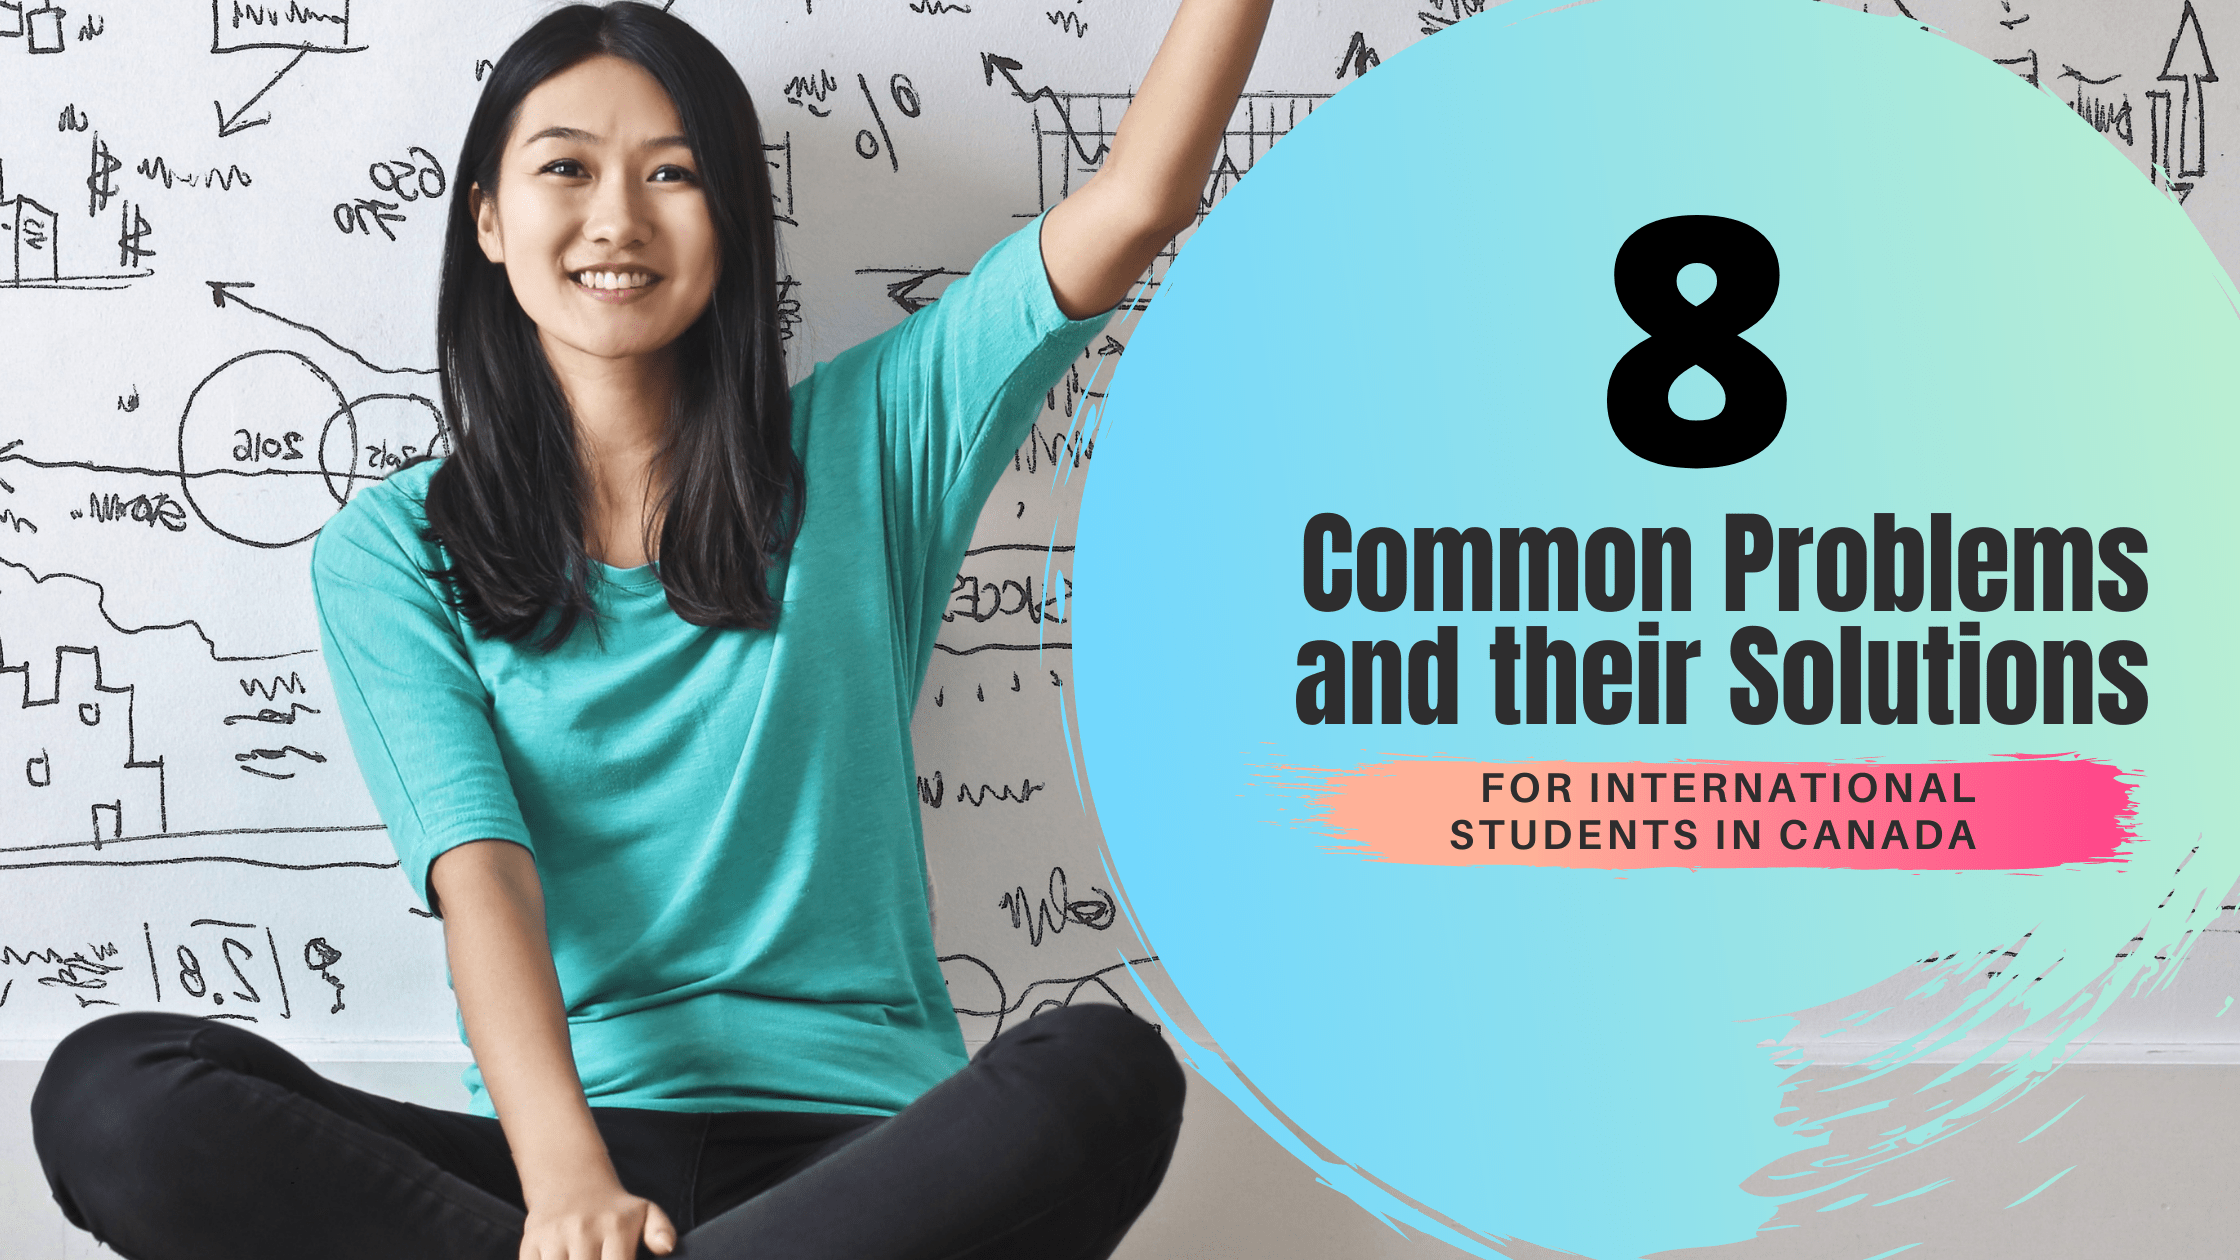 8 Common Problems and their Solutions for International Students in Canada